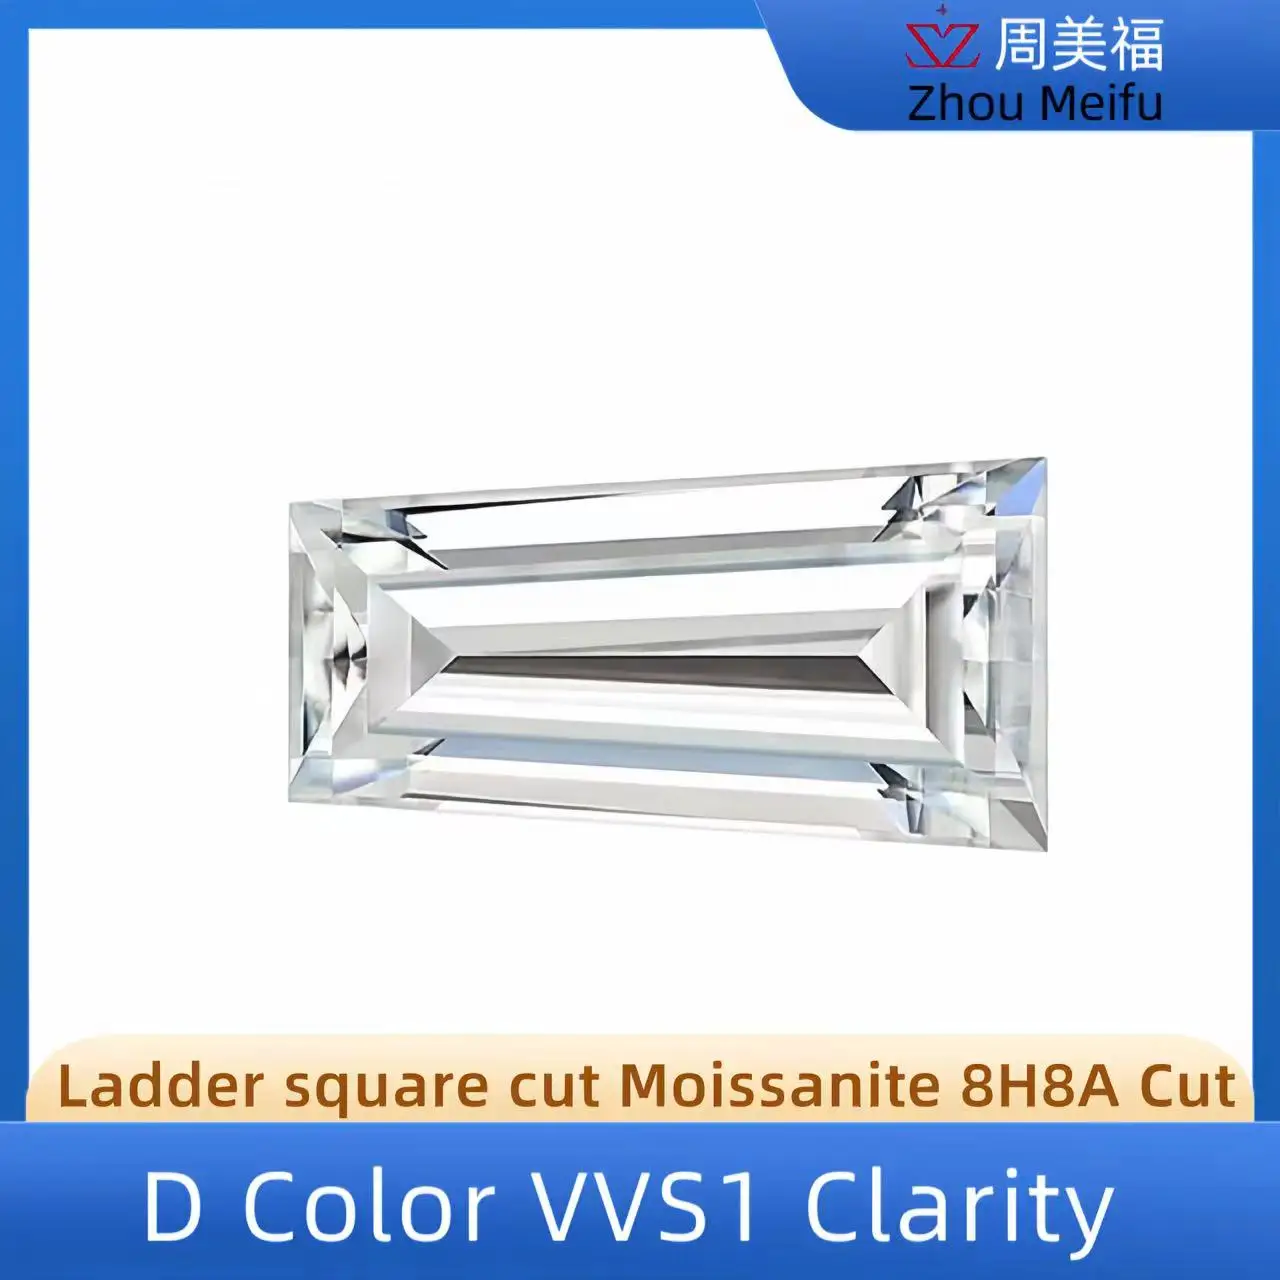 

Trapezoid Moissanite D Color VVS1 Clarity Loose Diamond Factory WholesaleProduction of 18K 14K 9K S925 Jewelry Processing